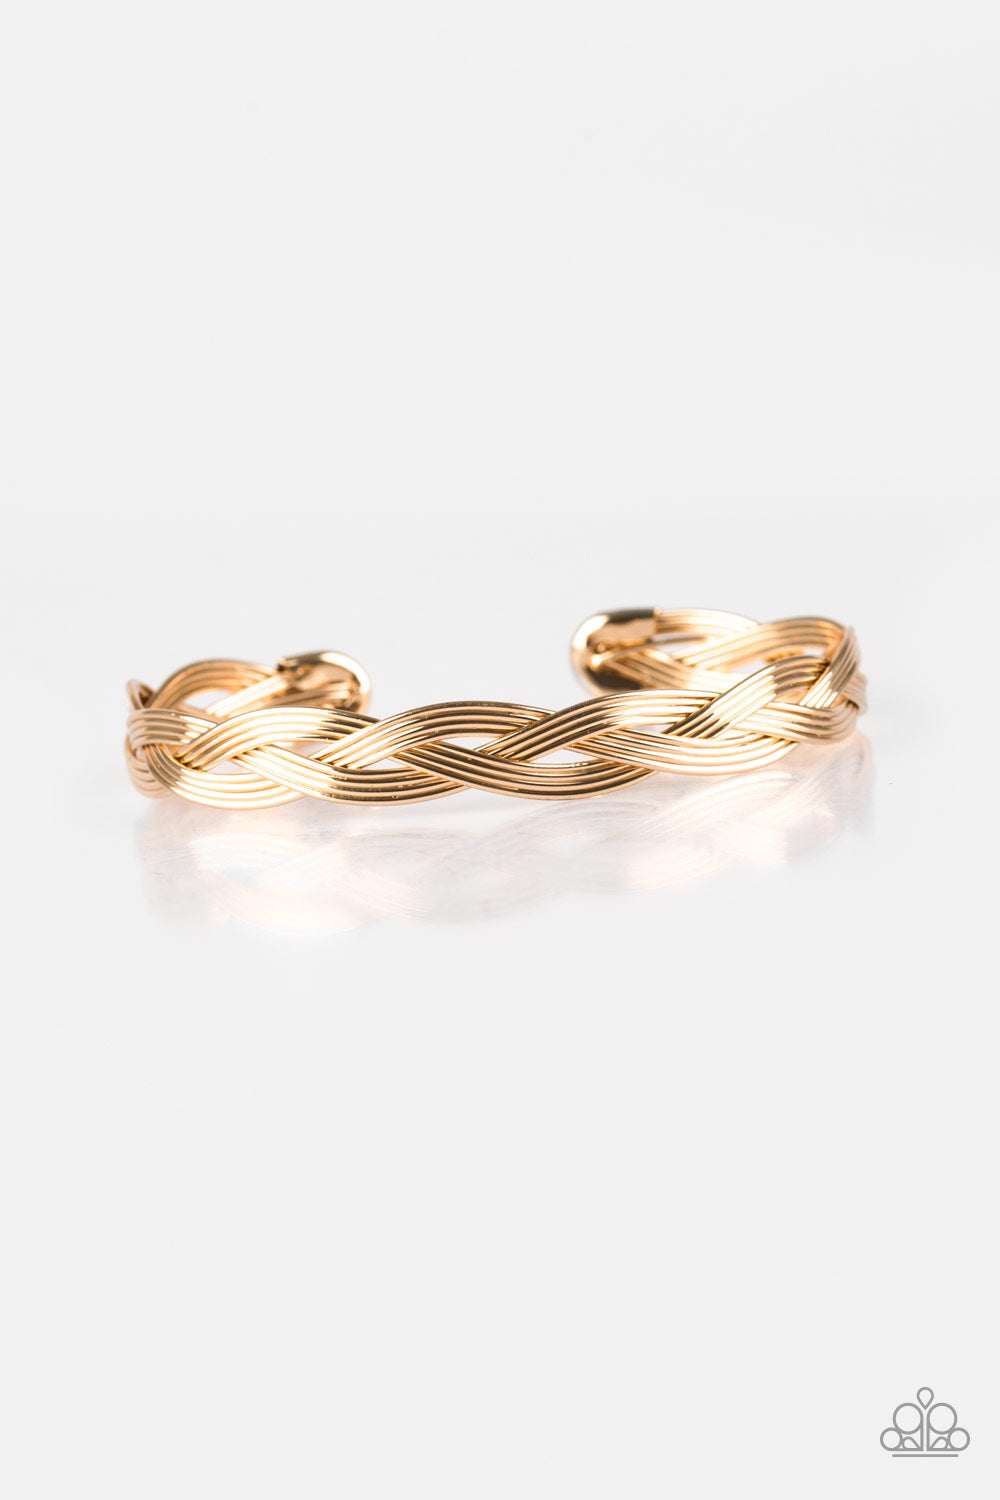 Business As Usual - Gold Cuff Bracelet - Paparazzi Accessories - Glistening gold wires braid across the wrist, coalescing into a dainty cuff. Sold as one individual bracelet.Perfect for any occasion or an everyday look. Shop the gold collection for matching accessories.